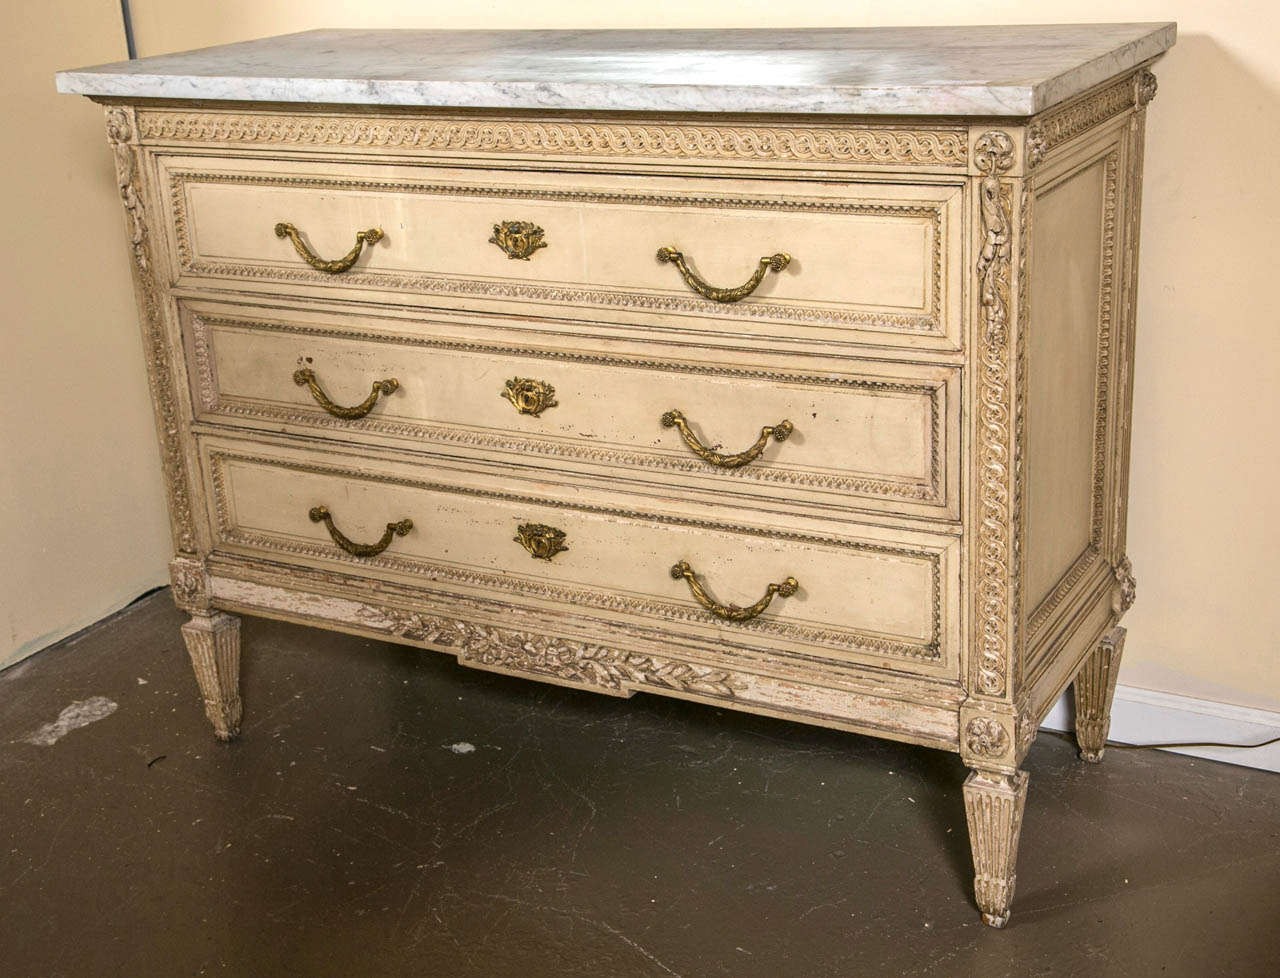 A very fine chest of drawers, commode, by Maison Jansen. Stamped and Made in France. The thick white marble top over a three drawer chest with finely carved sides, drawer frames and fronts in the Louis XVI taste. Heavy bronze finely cast pulls and